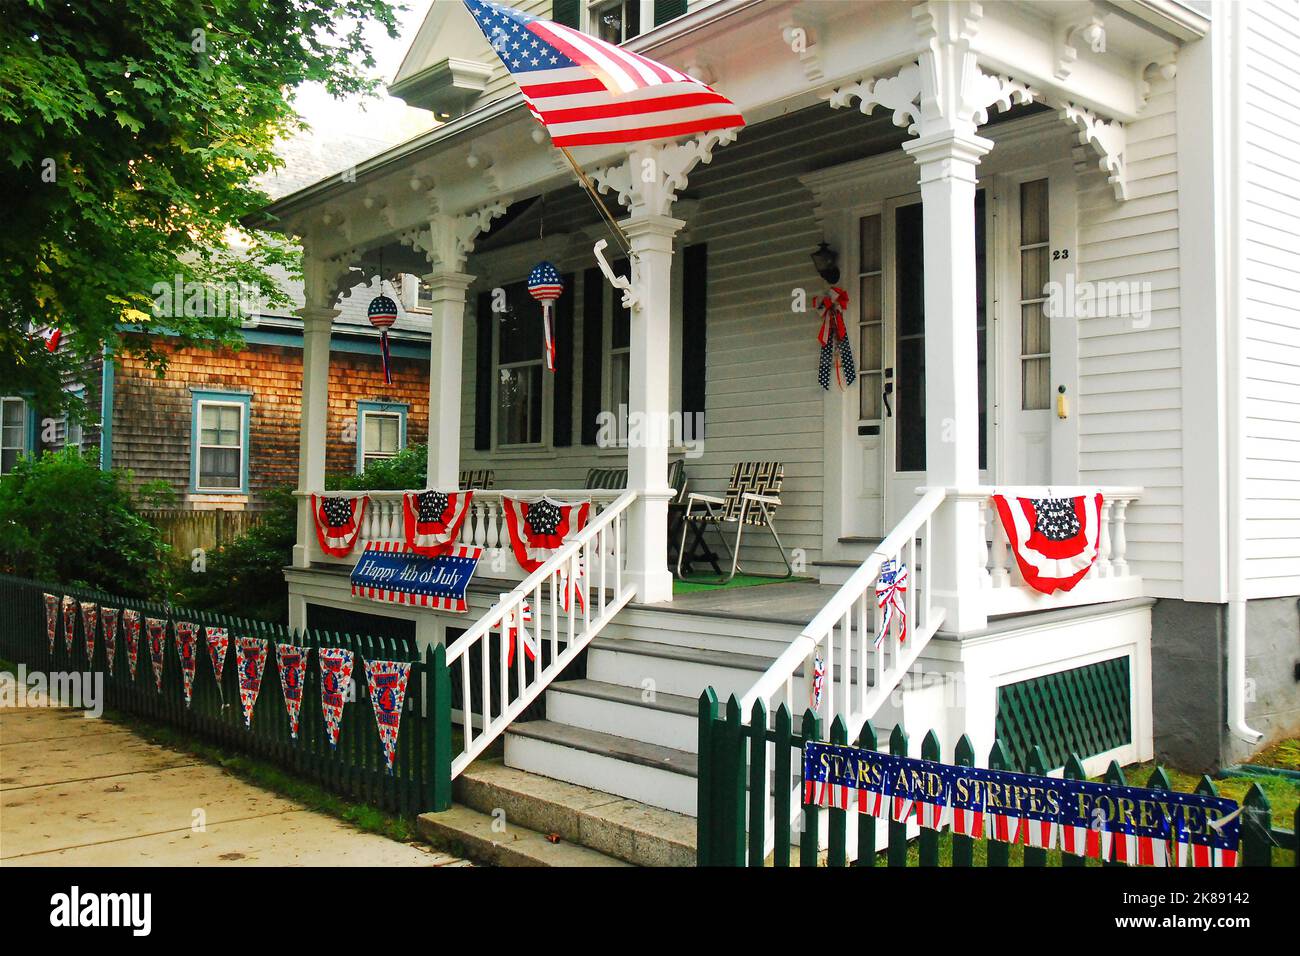 An American flag flies from the porch of a historic house on the Fourth of July in Bristol, Rhode Island Stock Photo